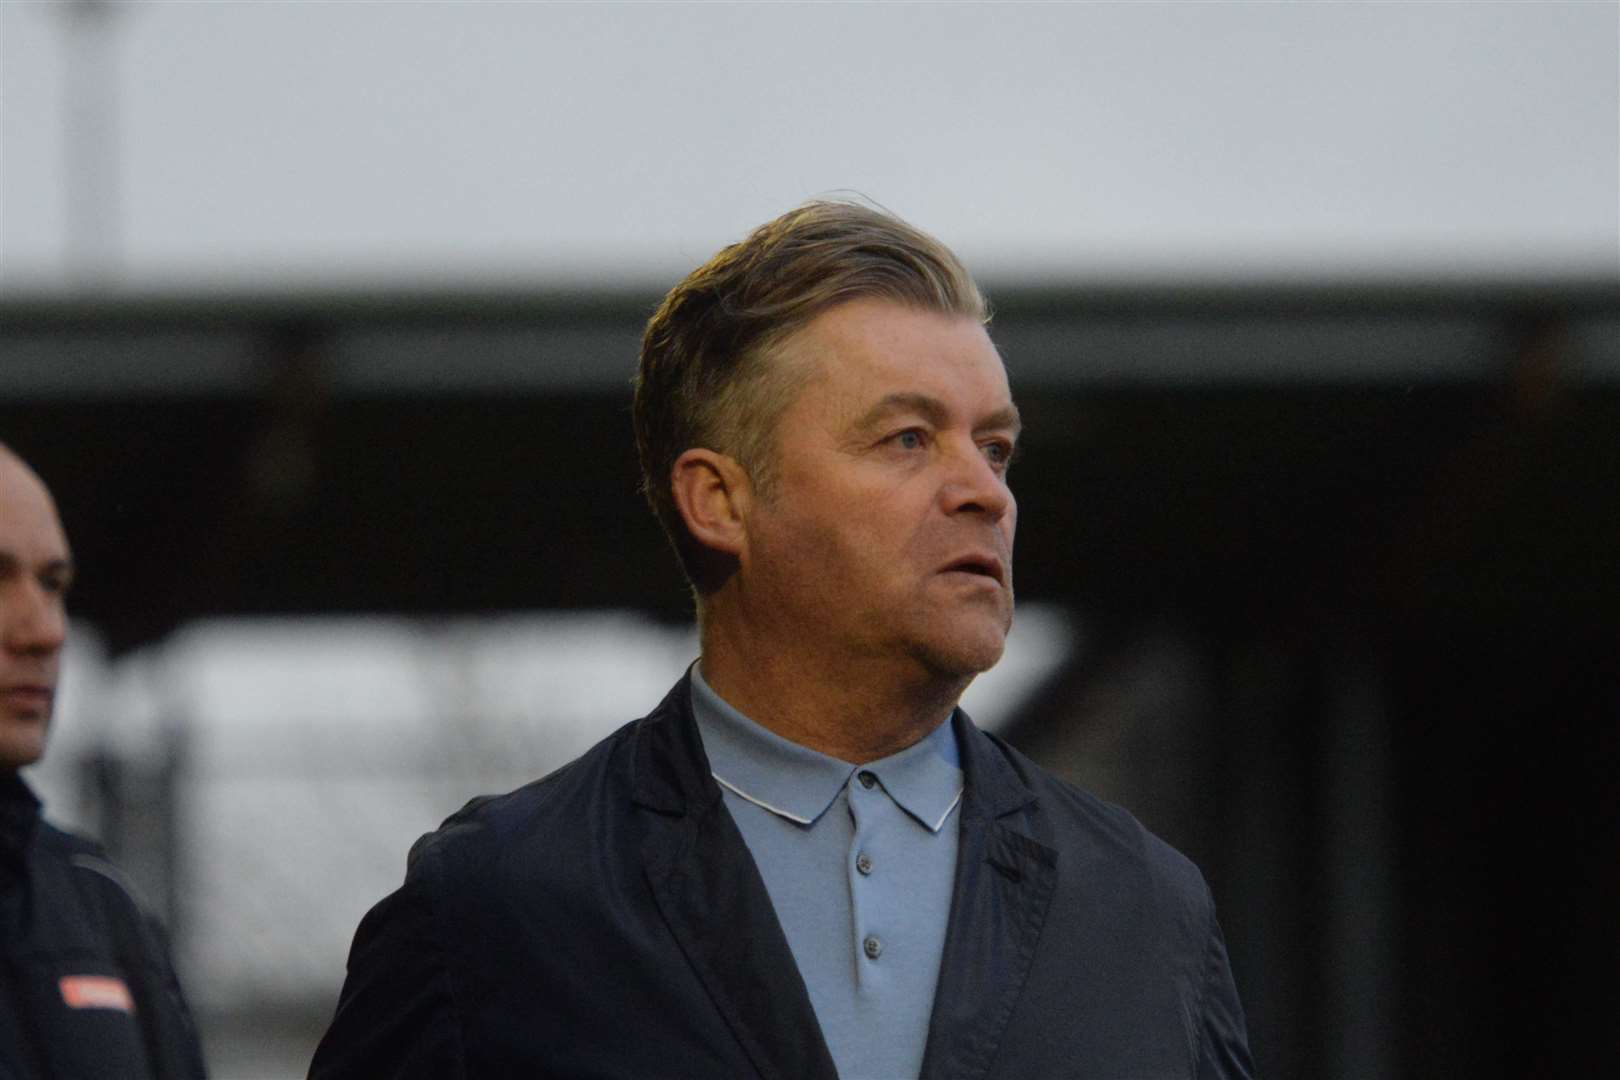 Dartford manager Steve King has started to build towards the 2020/21 season